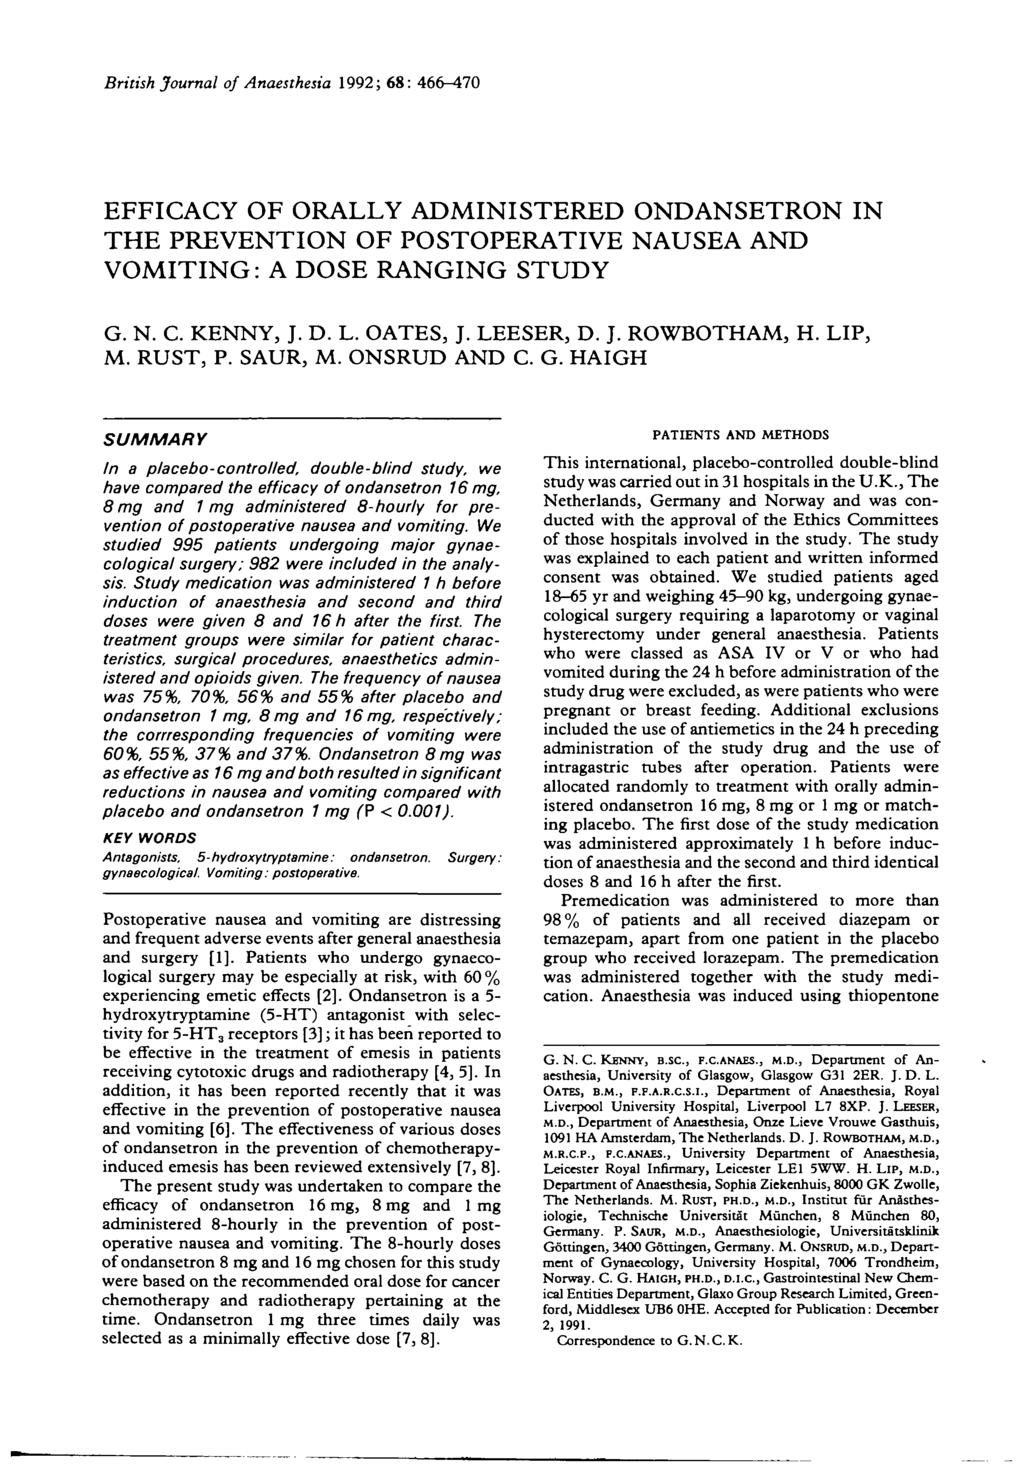 British Journal of Anaesthesia 1992; 68: 466-^47 EFFICACY OF ORALLY ADMINISTERED ONDANSETRON IN THE PREVENTION OF POSTOPERATIVE NAUSEA AND VOMITING: A DOSE RANGING STUDY G. N. C. KENNY, J. D. L.